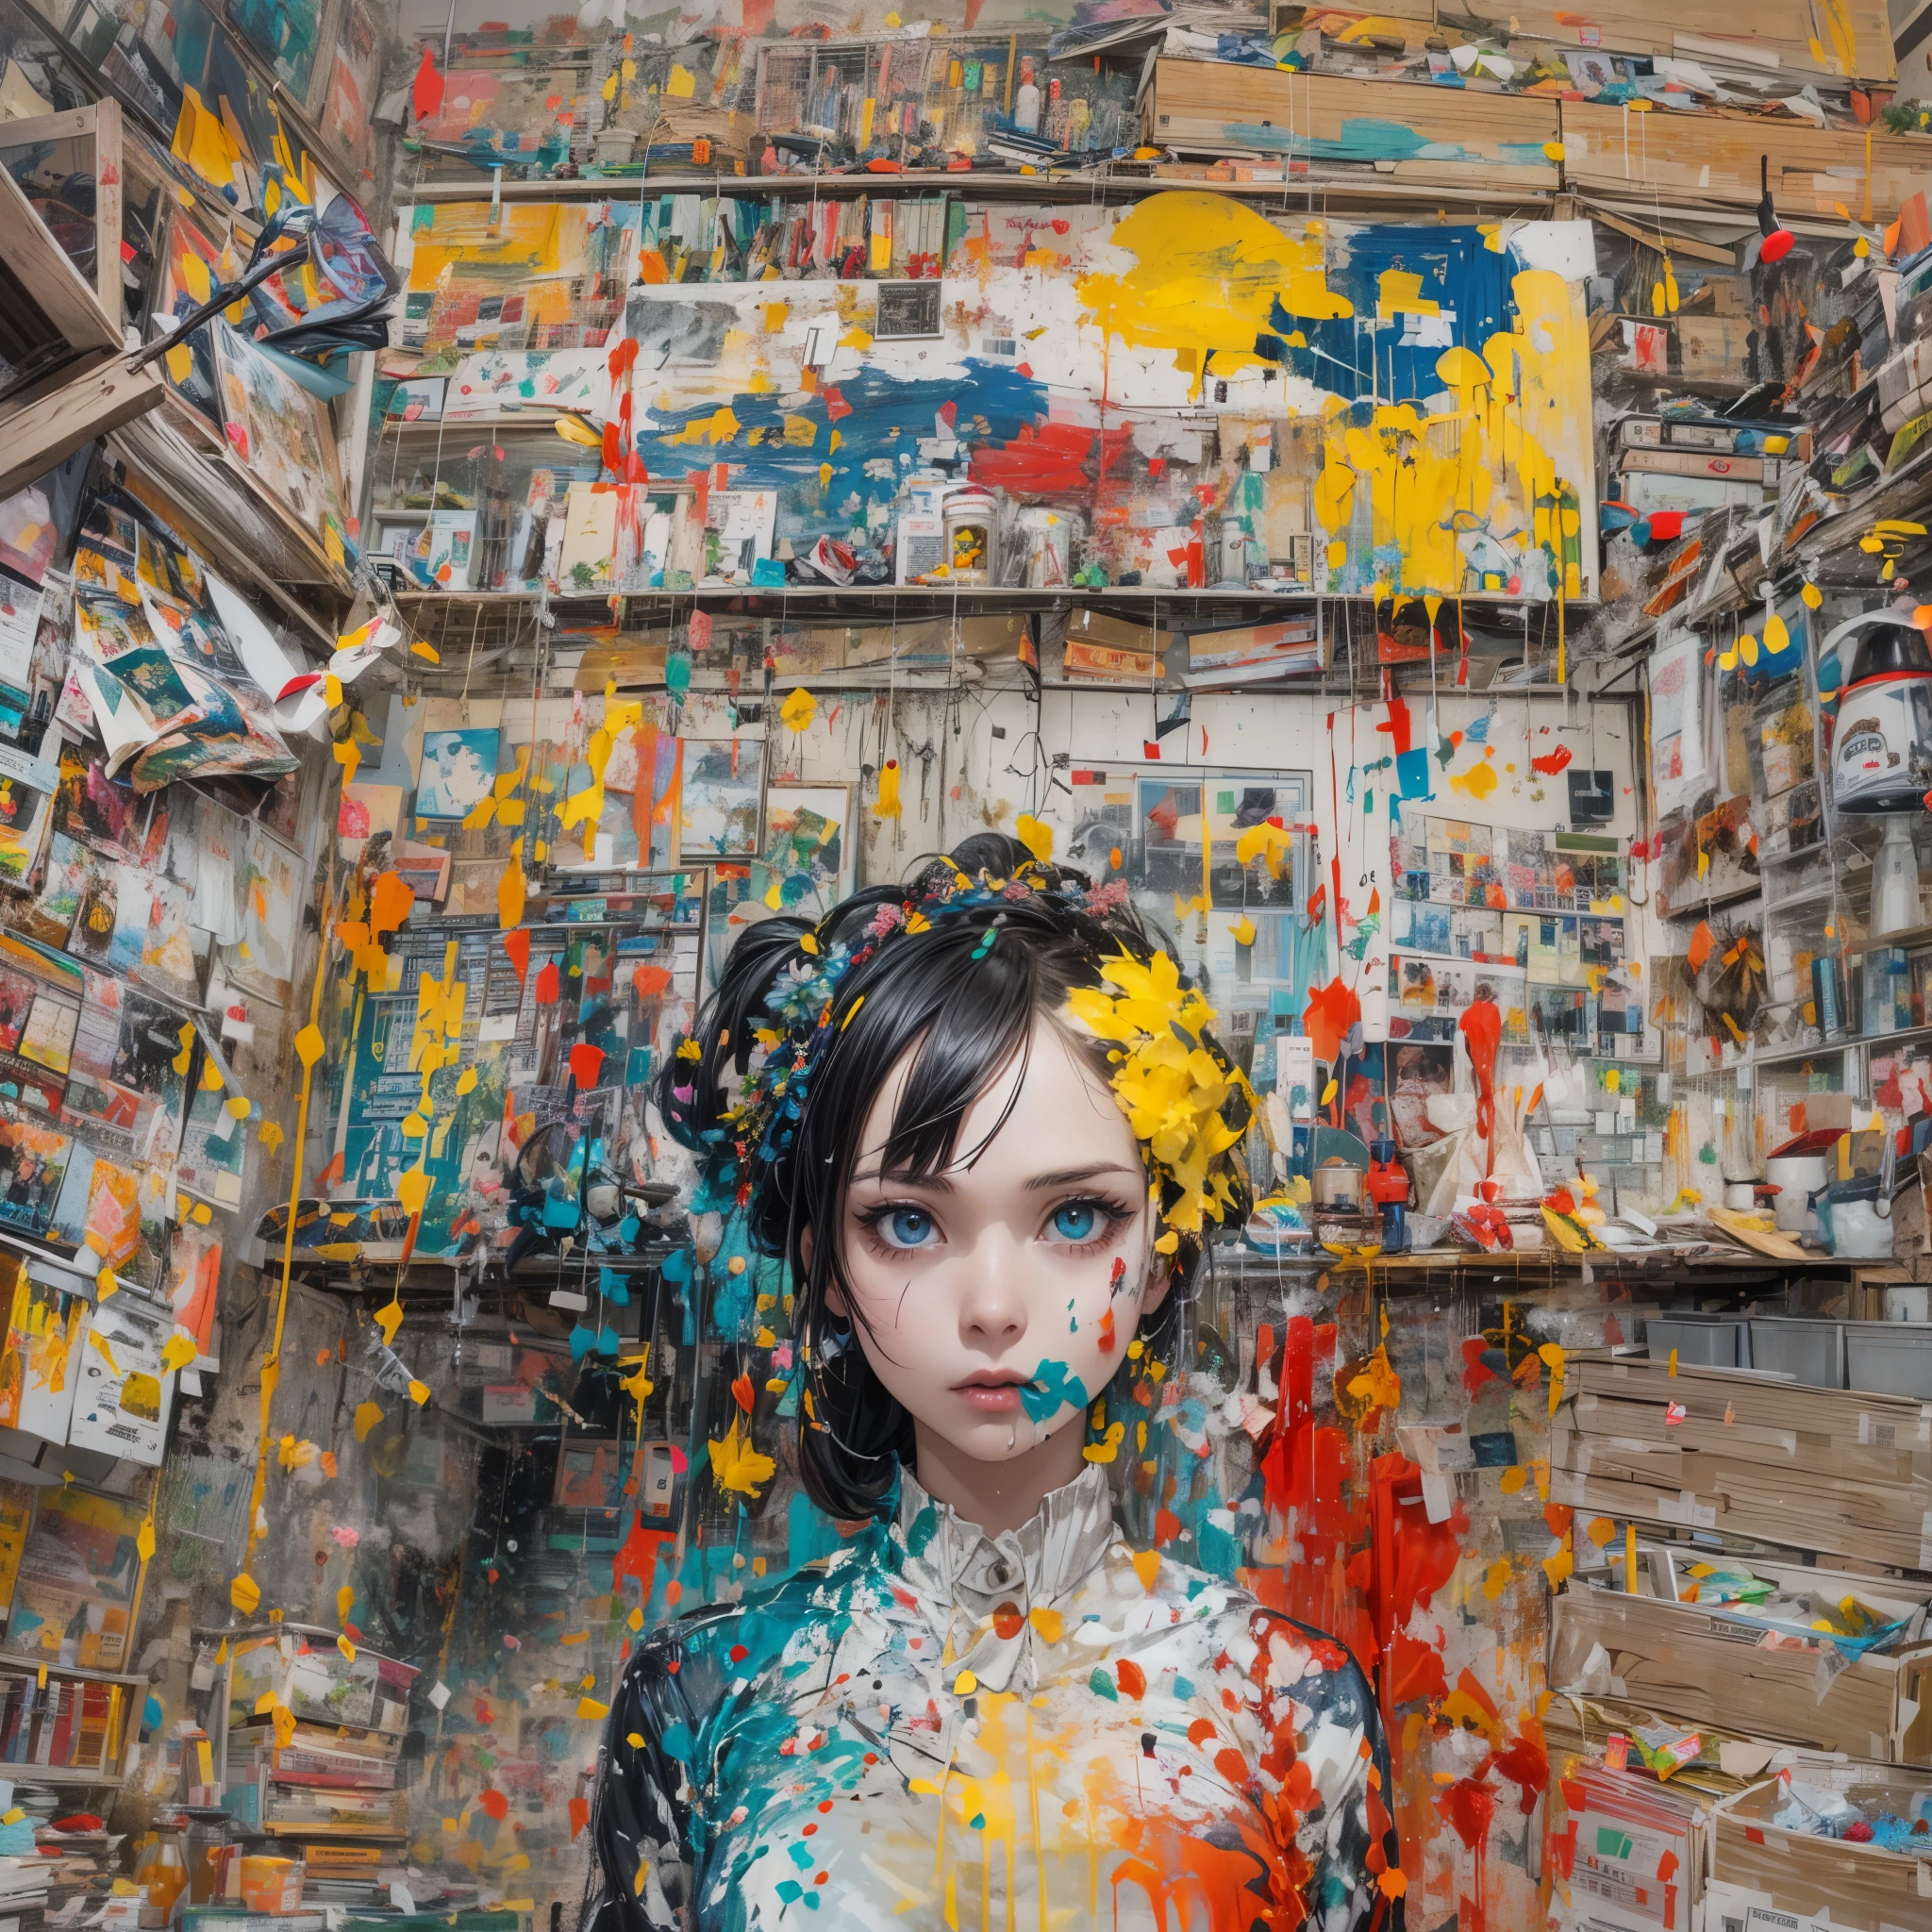 Base Layer (Setting): An art studio with large, primary-colored canvases on the walls, BREAK Middle Layer (Main Character): A girl with bold black eyeliner, holding a painter's palette, splashes of primary colors on her white apron, BREAK Foreground Layer (Additional Elements): Scattered paintbrushes and tubes of paint, BREAK Effect Layer (Focus): The intensity of her focus as she mixes a vivid red, BREAK Final Touches (Atmosphere): The creative chaos of the space, embodying the experimental nature of Godard's films.